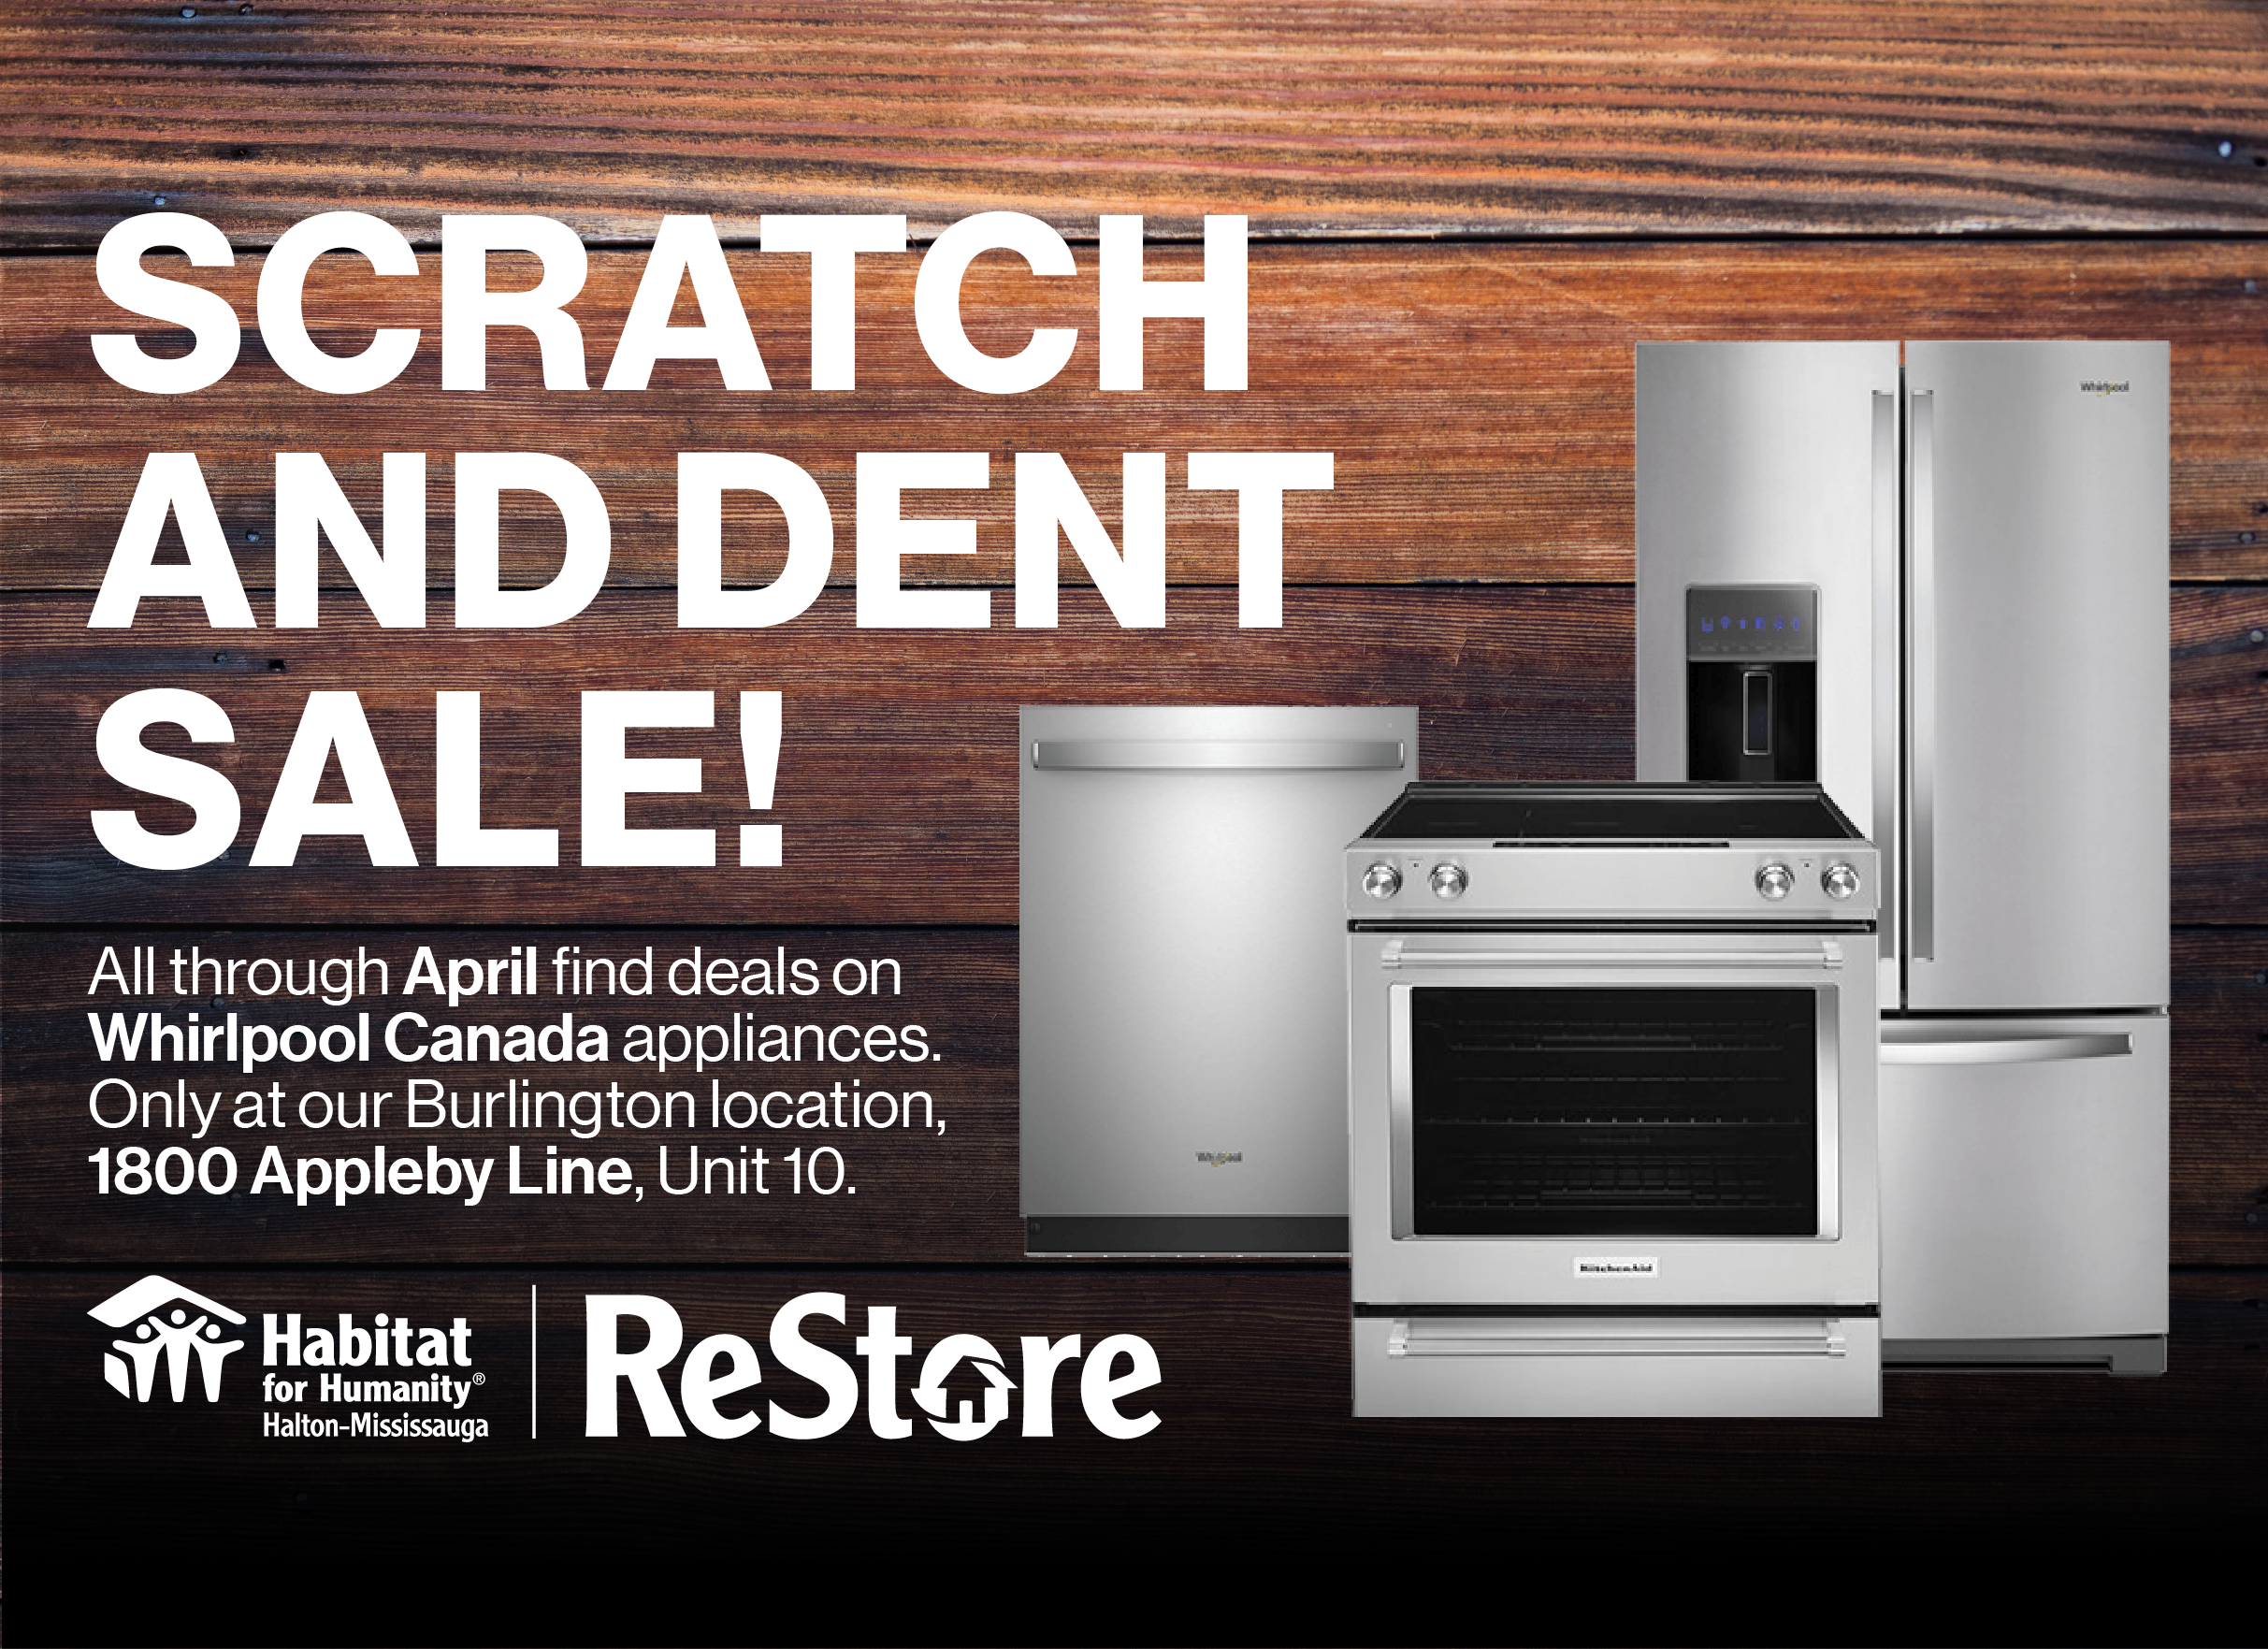 Whirlpool Scratch And Dent Sale April 1 30 Habitat For Humanity